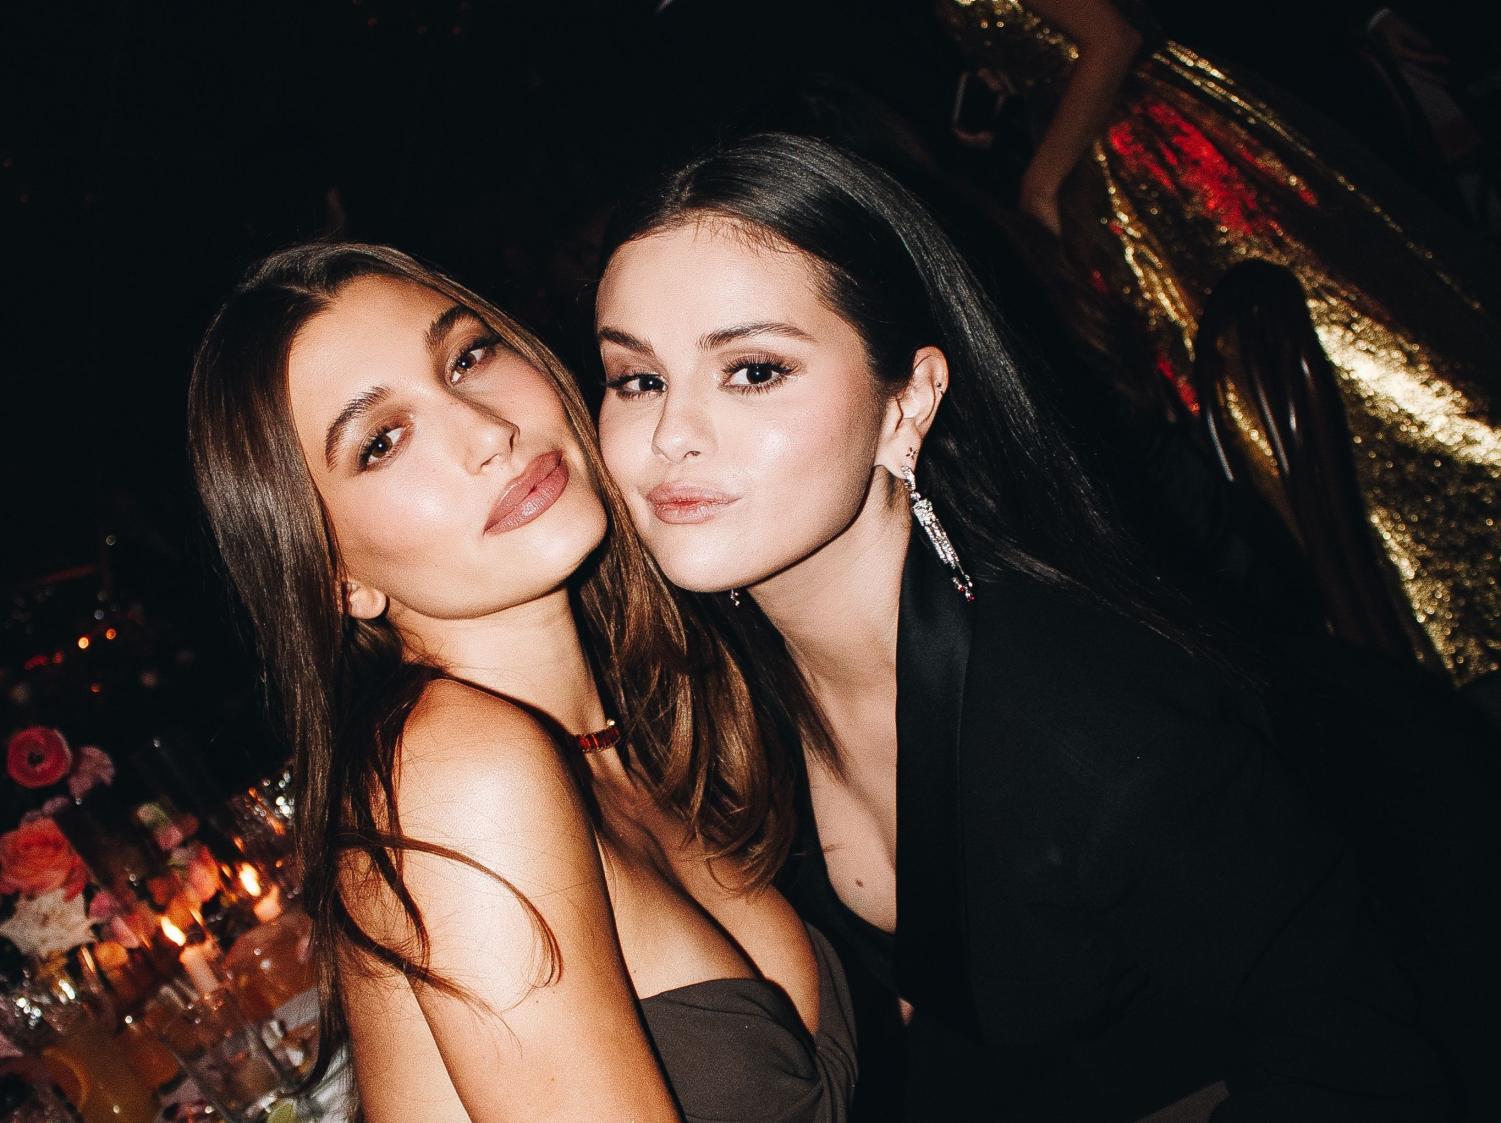 Hailey and Selena Aren’t Feuding, But the Internet Is – NHS Chief Advocate